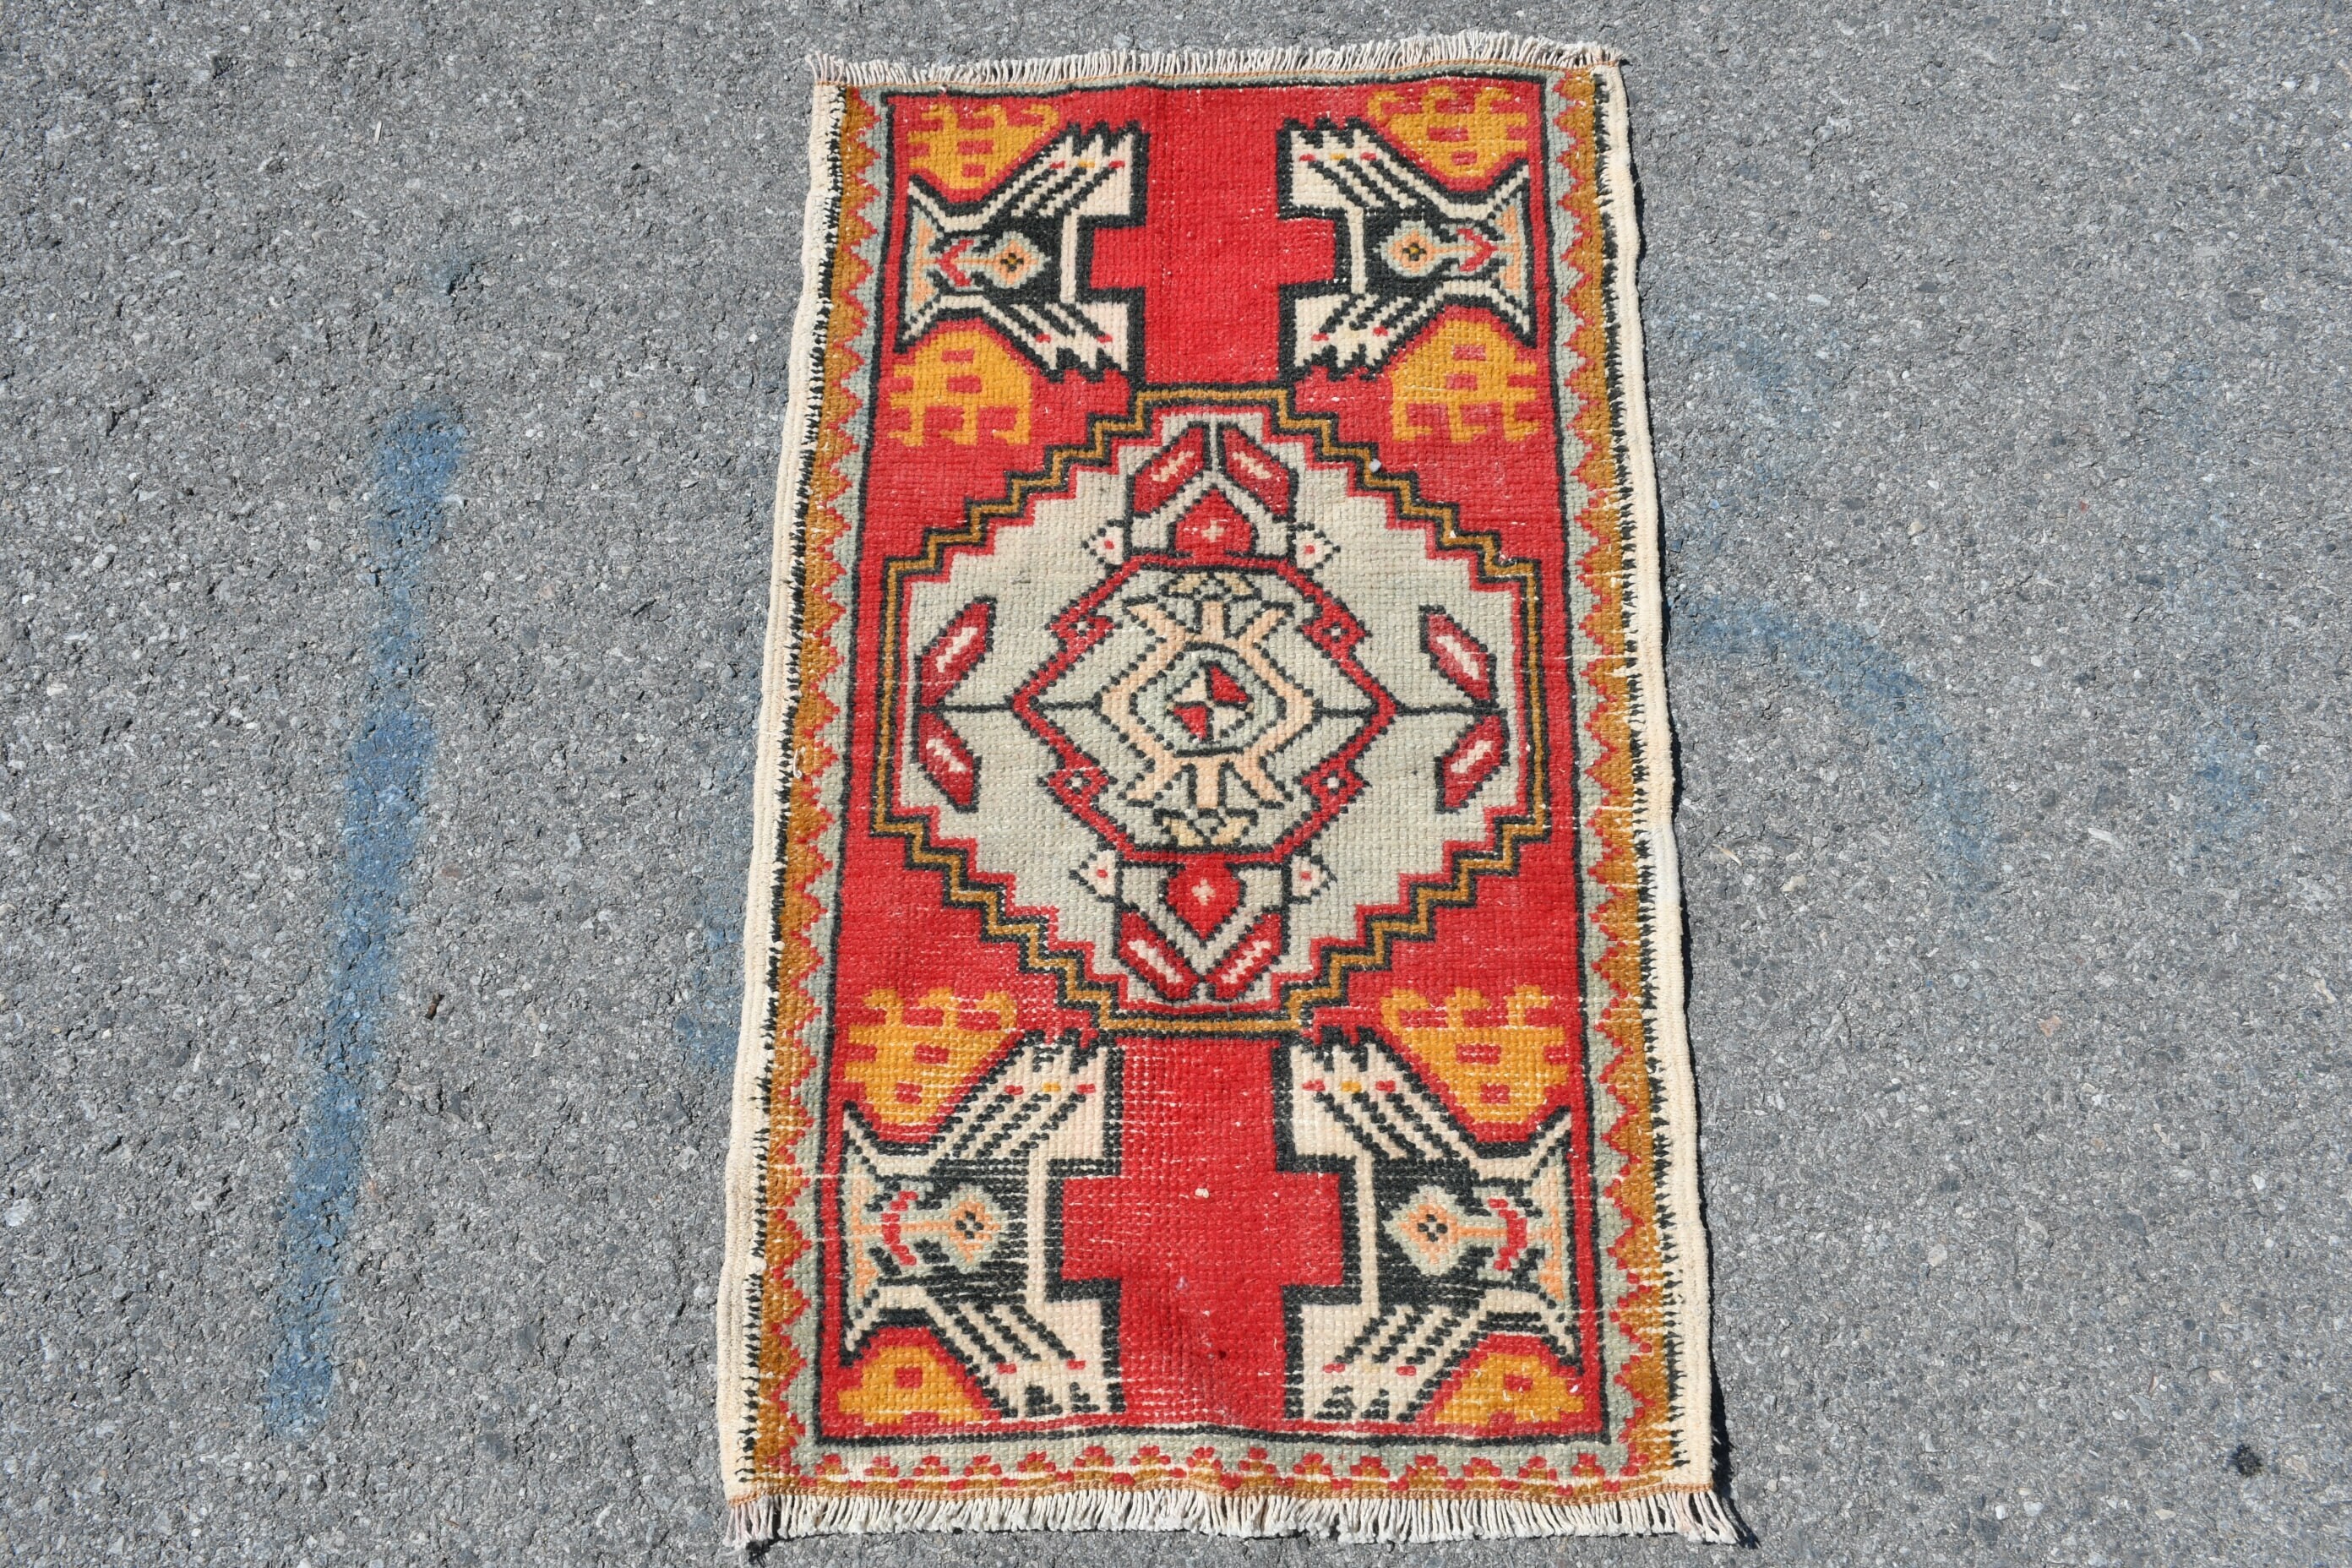 Turkish Rugs, Antique Rugs, 1.7x2.9 ft Small Rugs, Vintage Rugs, Home Decor Rugs, Red Floor Rug, Bright Rugs, Bathroom Rugs, Entry Rugs